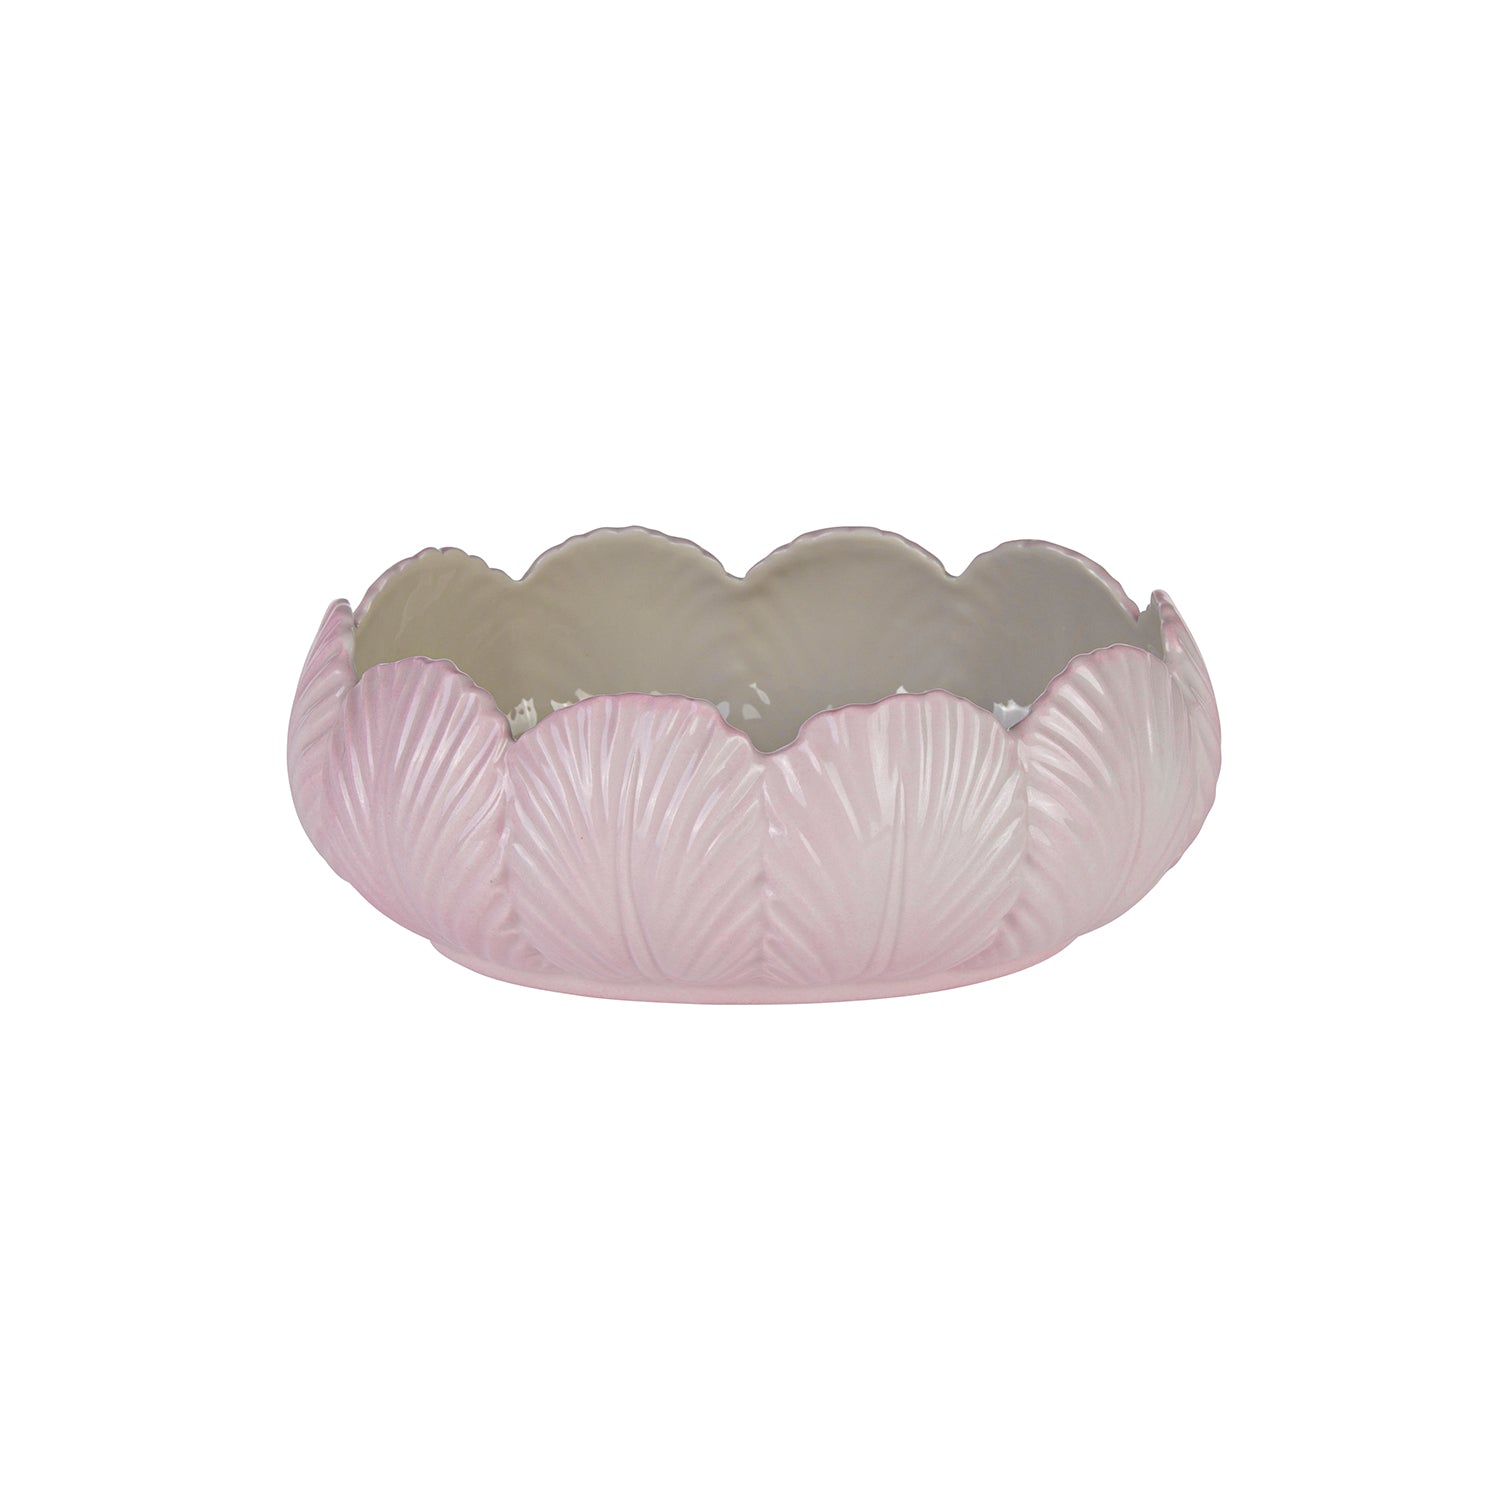 Tulip Small Serving Bowl - Pink & White